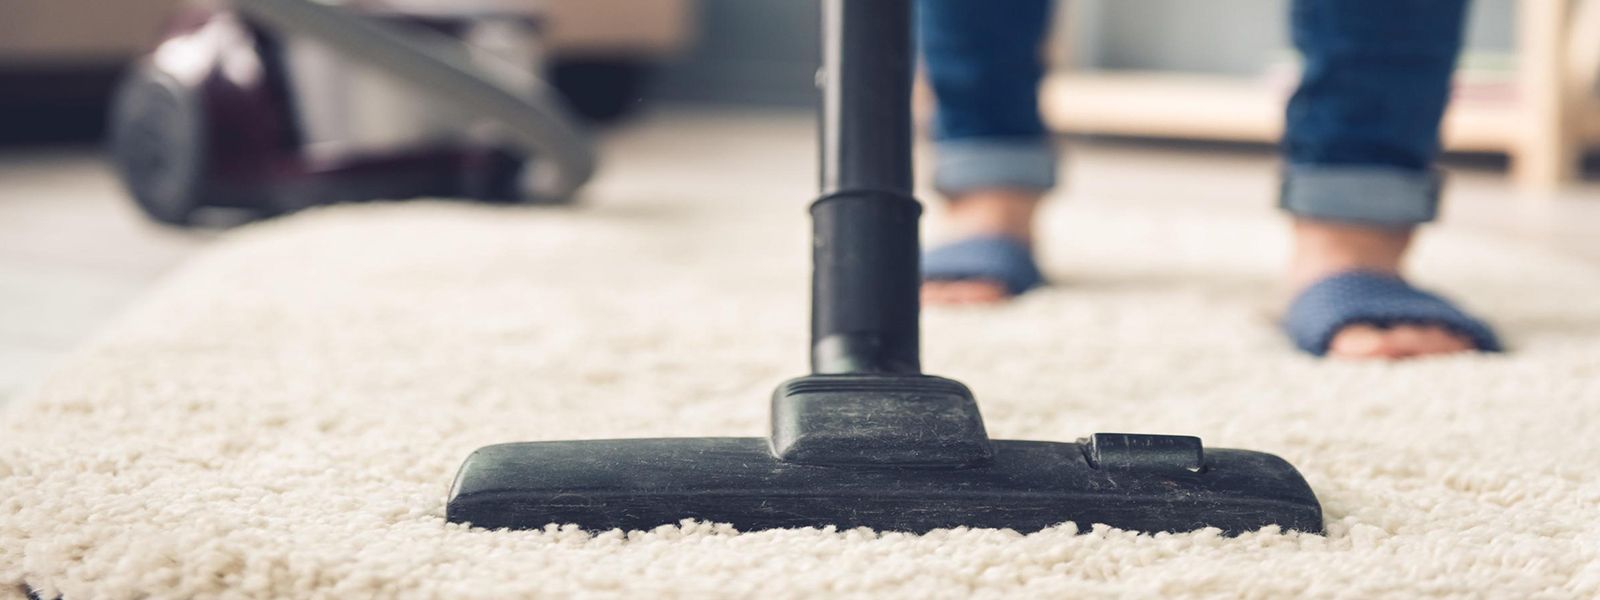 Best Deal Steam Carpet Cleaning Residential Katy Tx